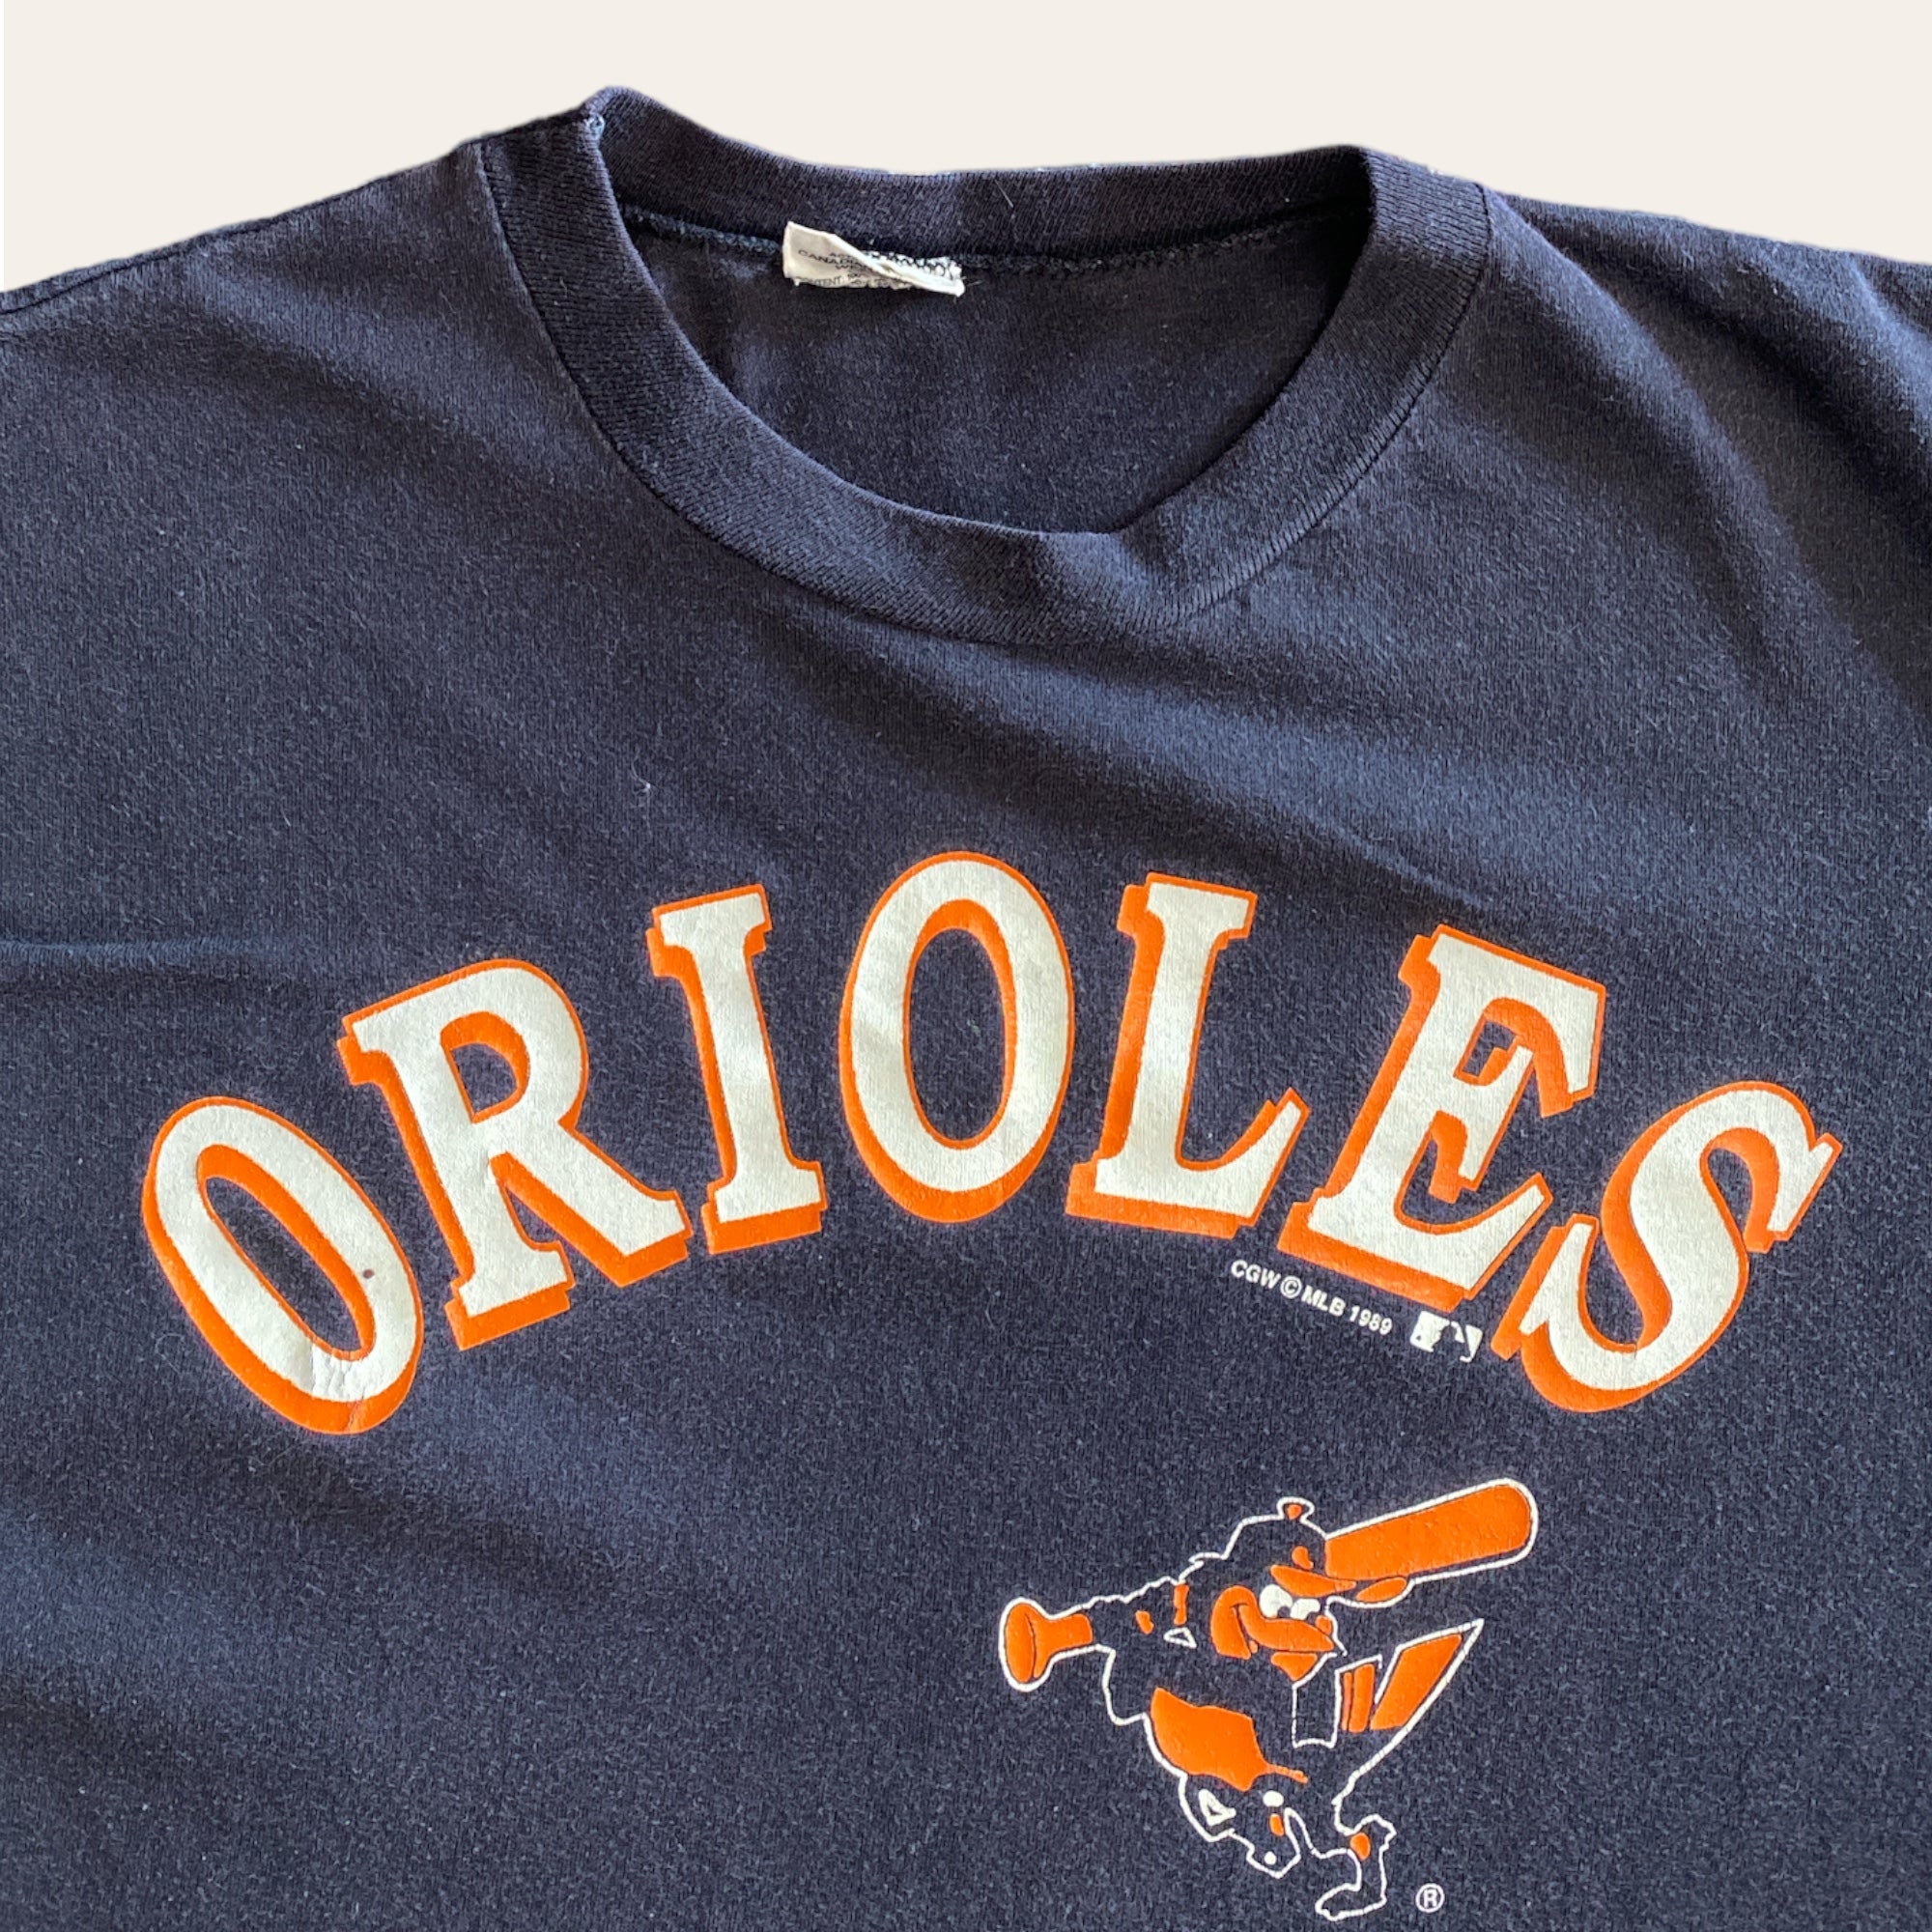 1989 Baltimore Orioles Tee Size L